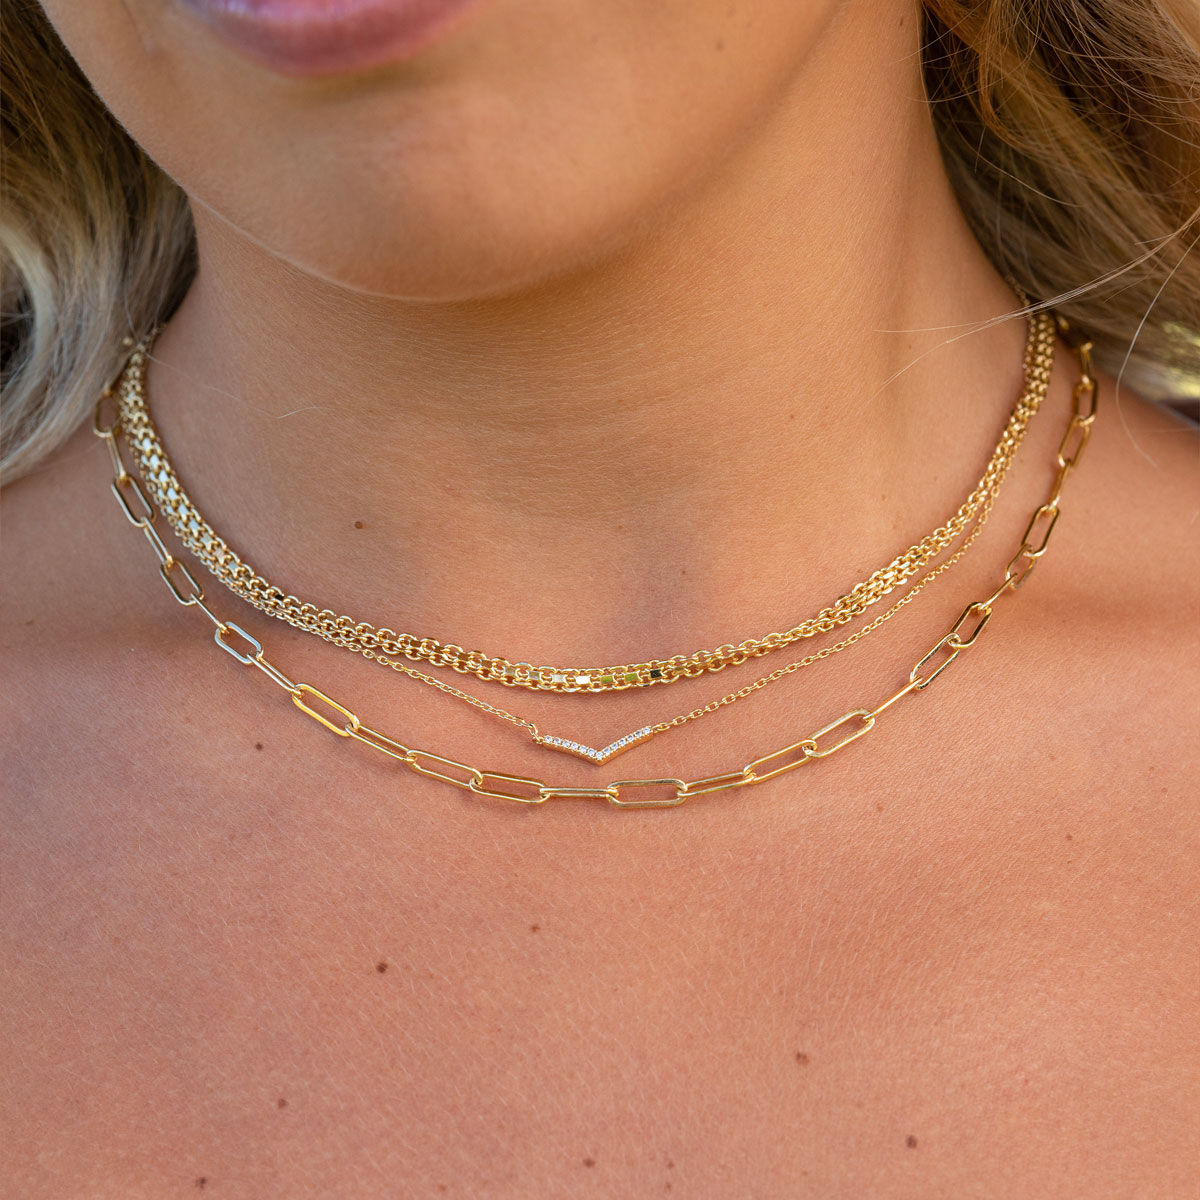 Beautiful gold chain layered necklaces